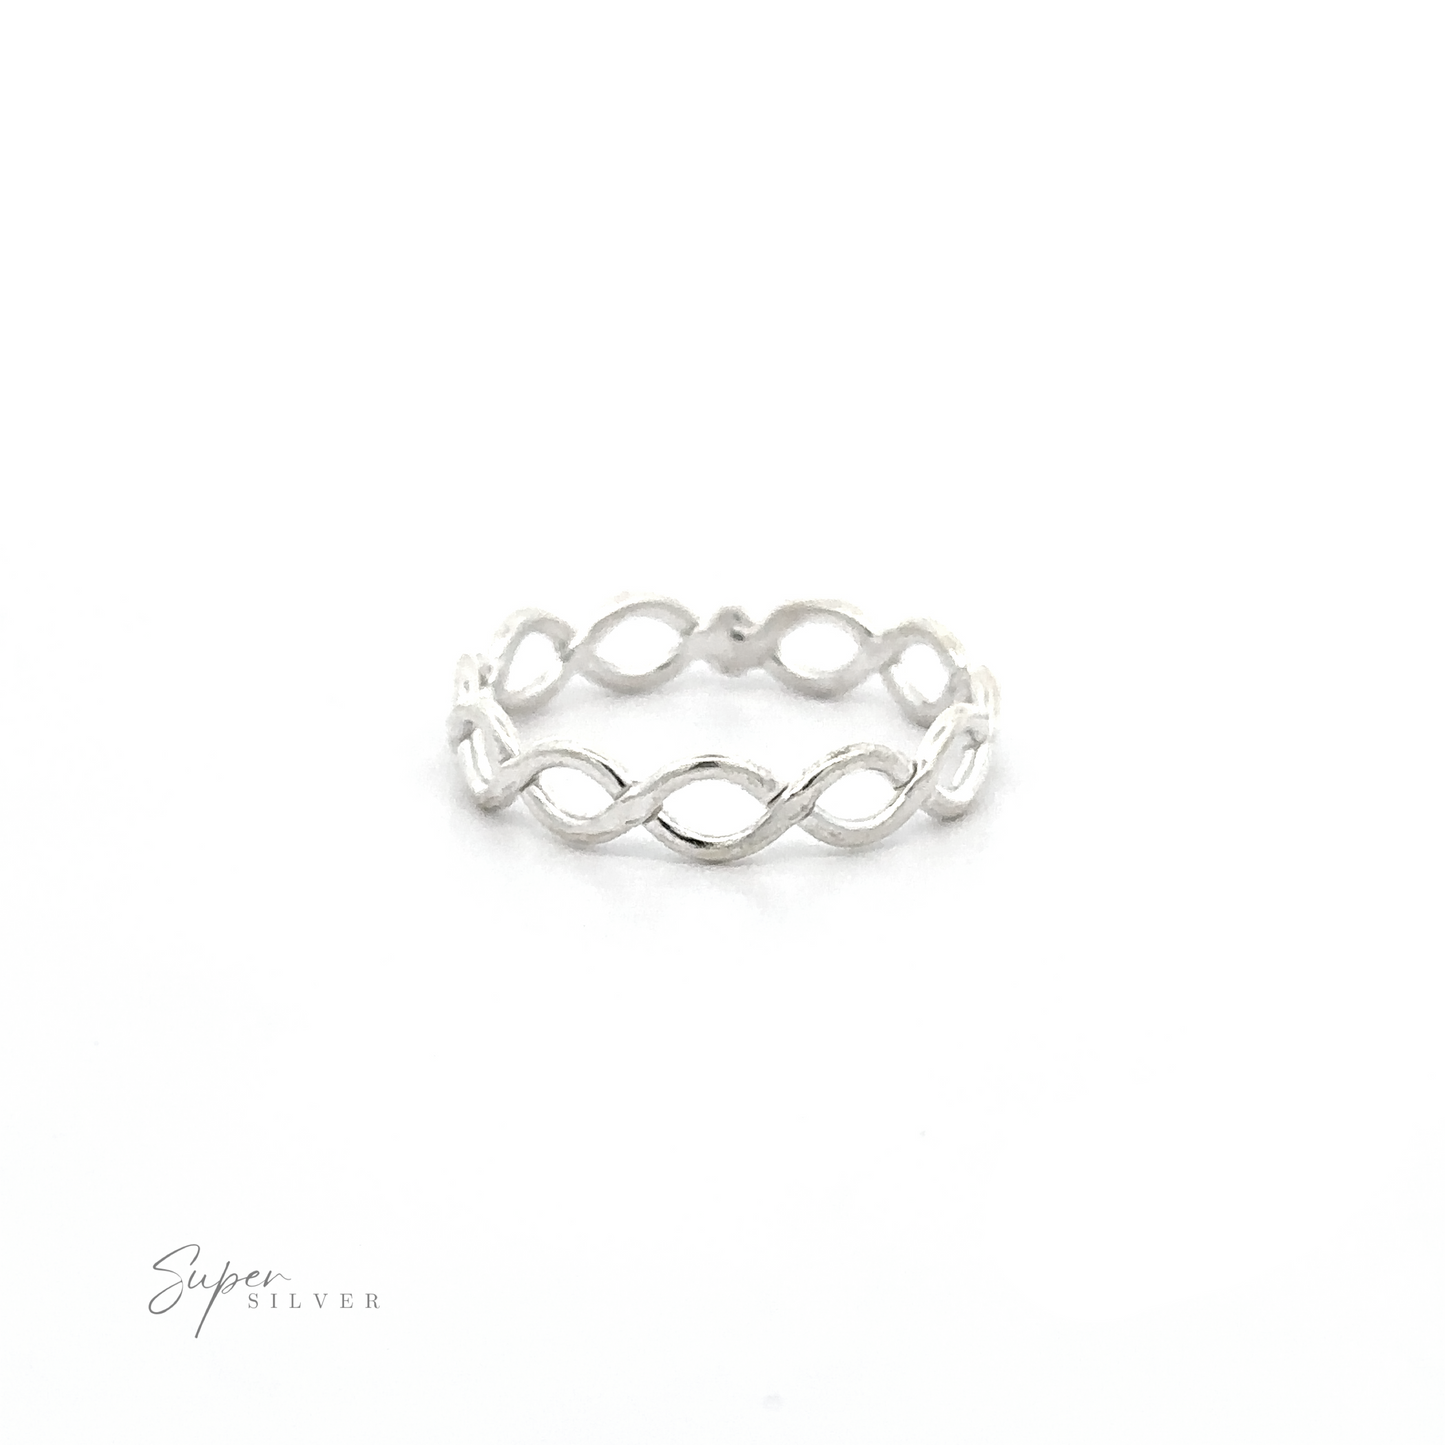 A Simple Weave Band infinity ring in sterling silver on a white background.